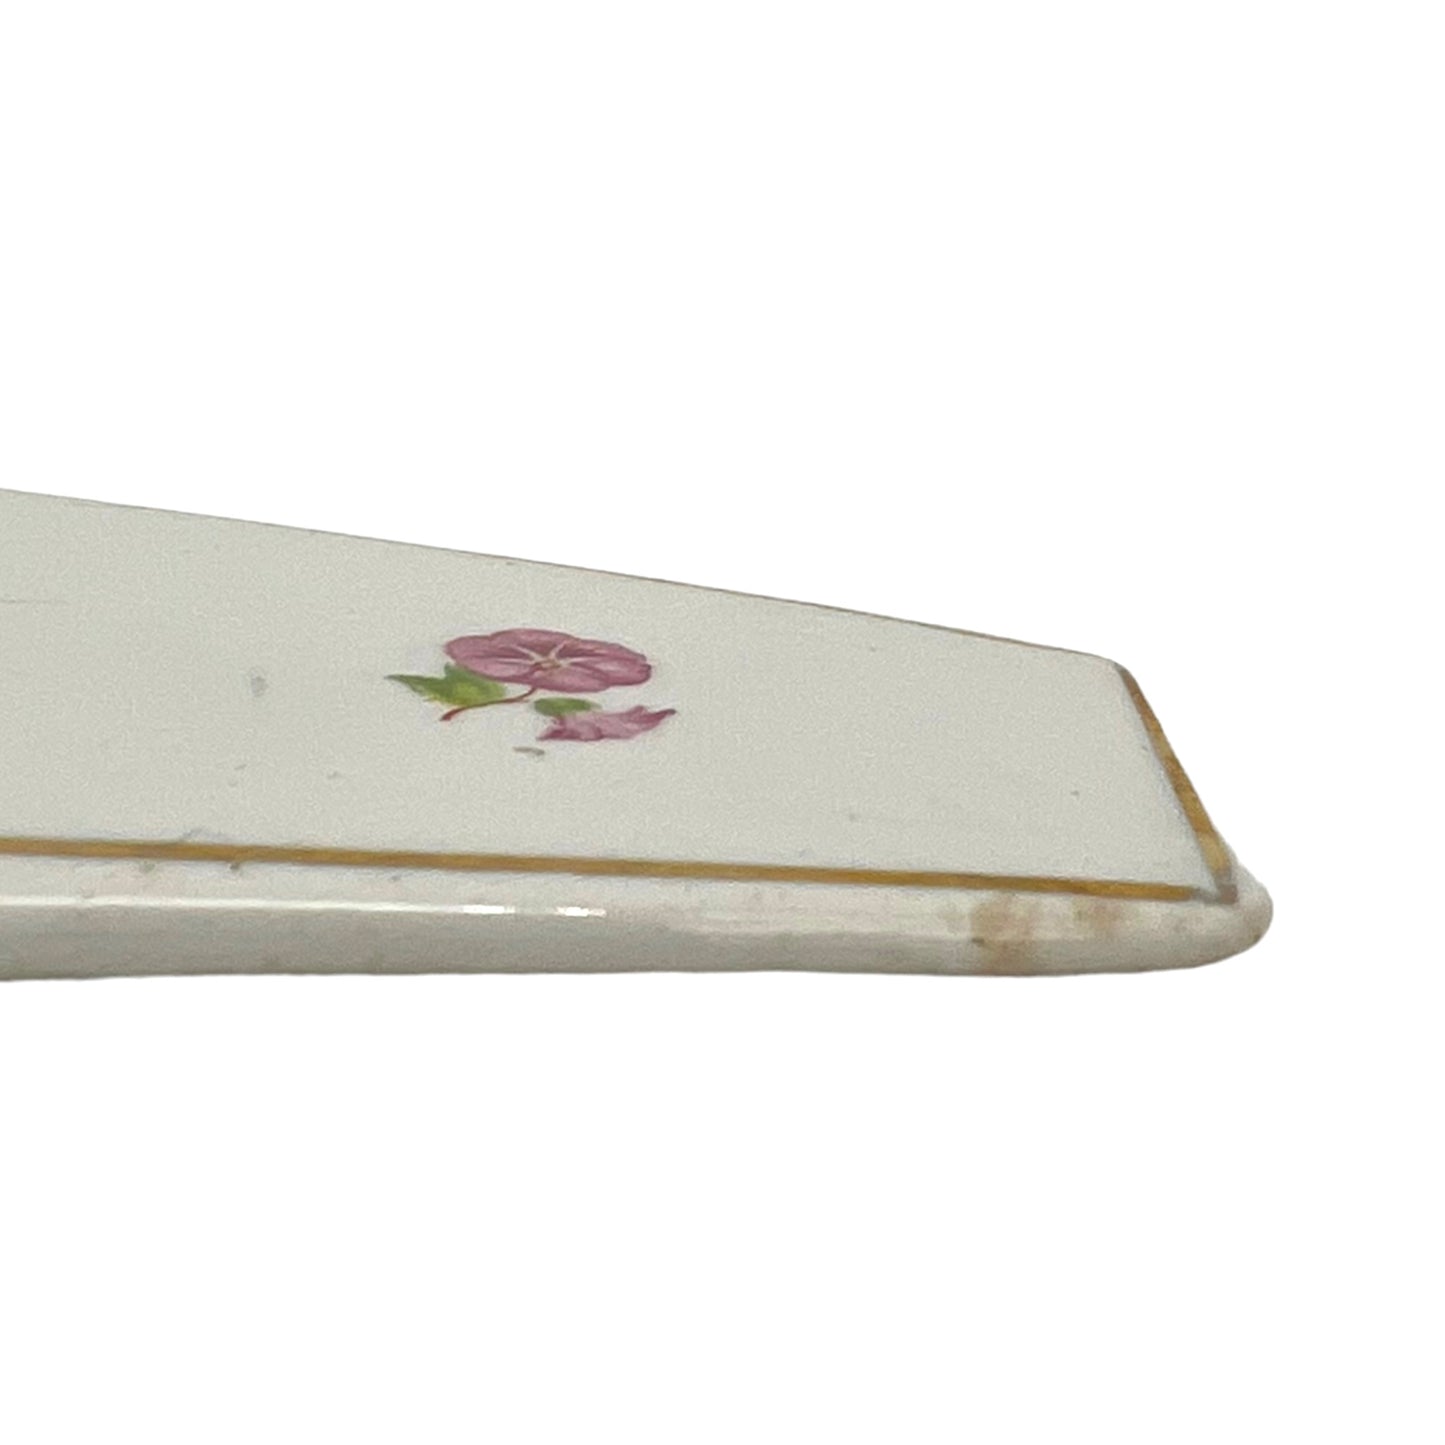 image 3 French porcelain cake server sold by All Things French Store